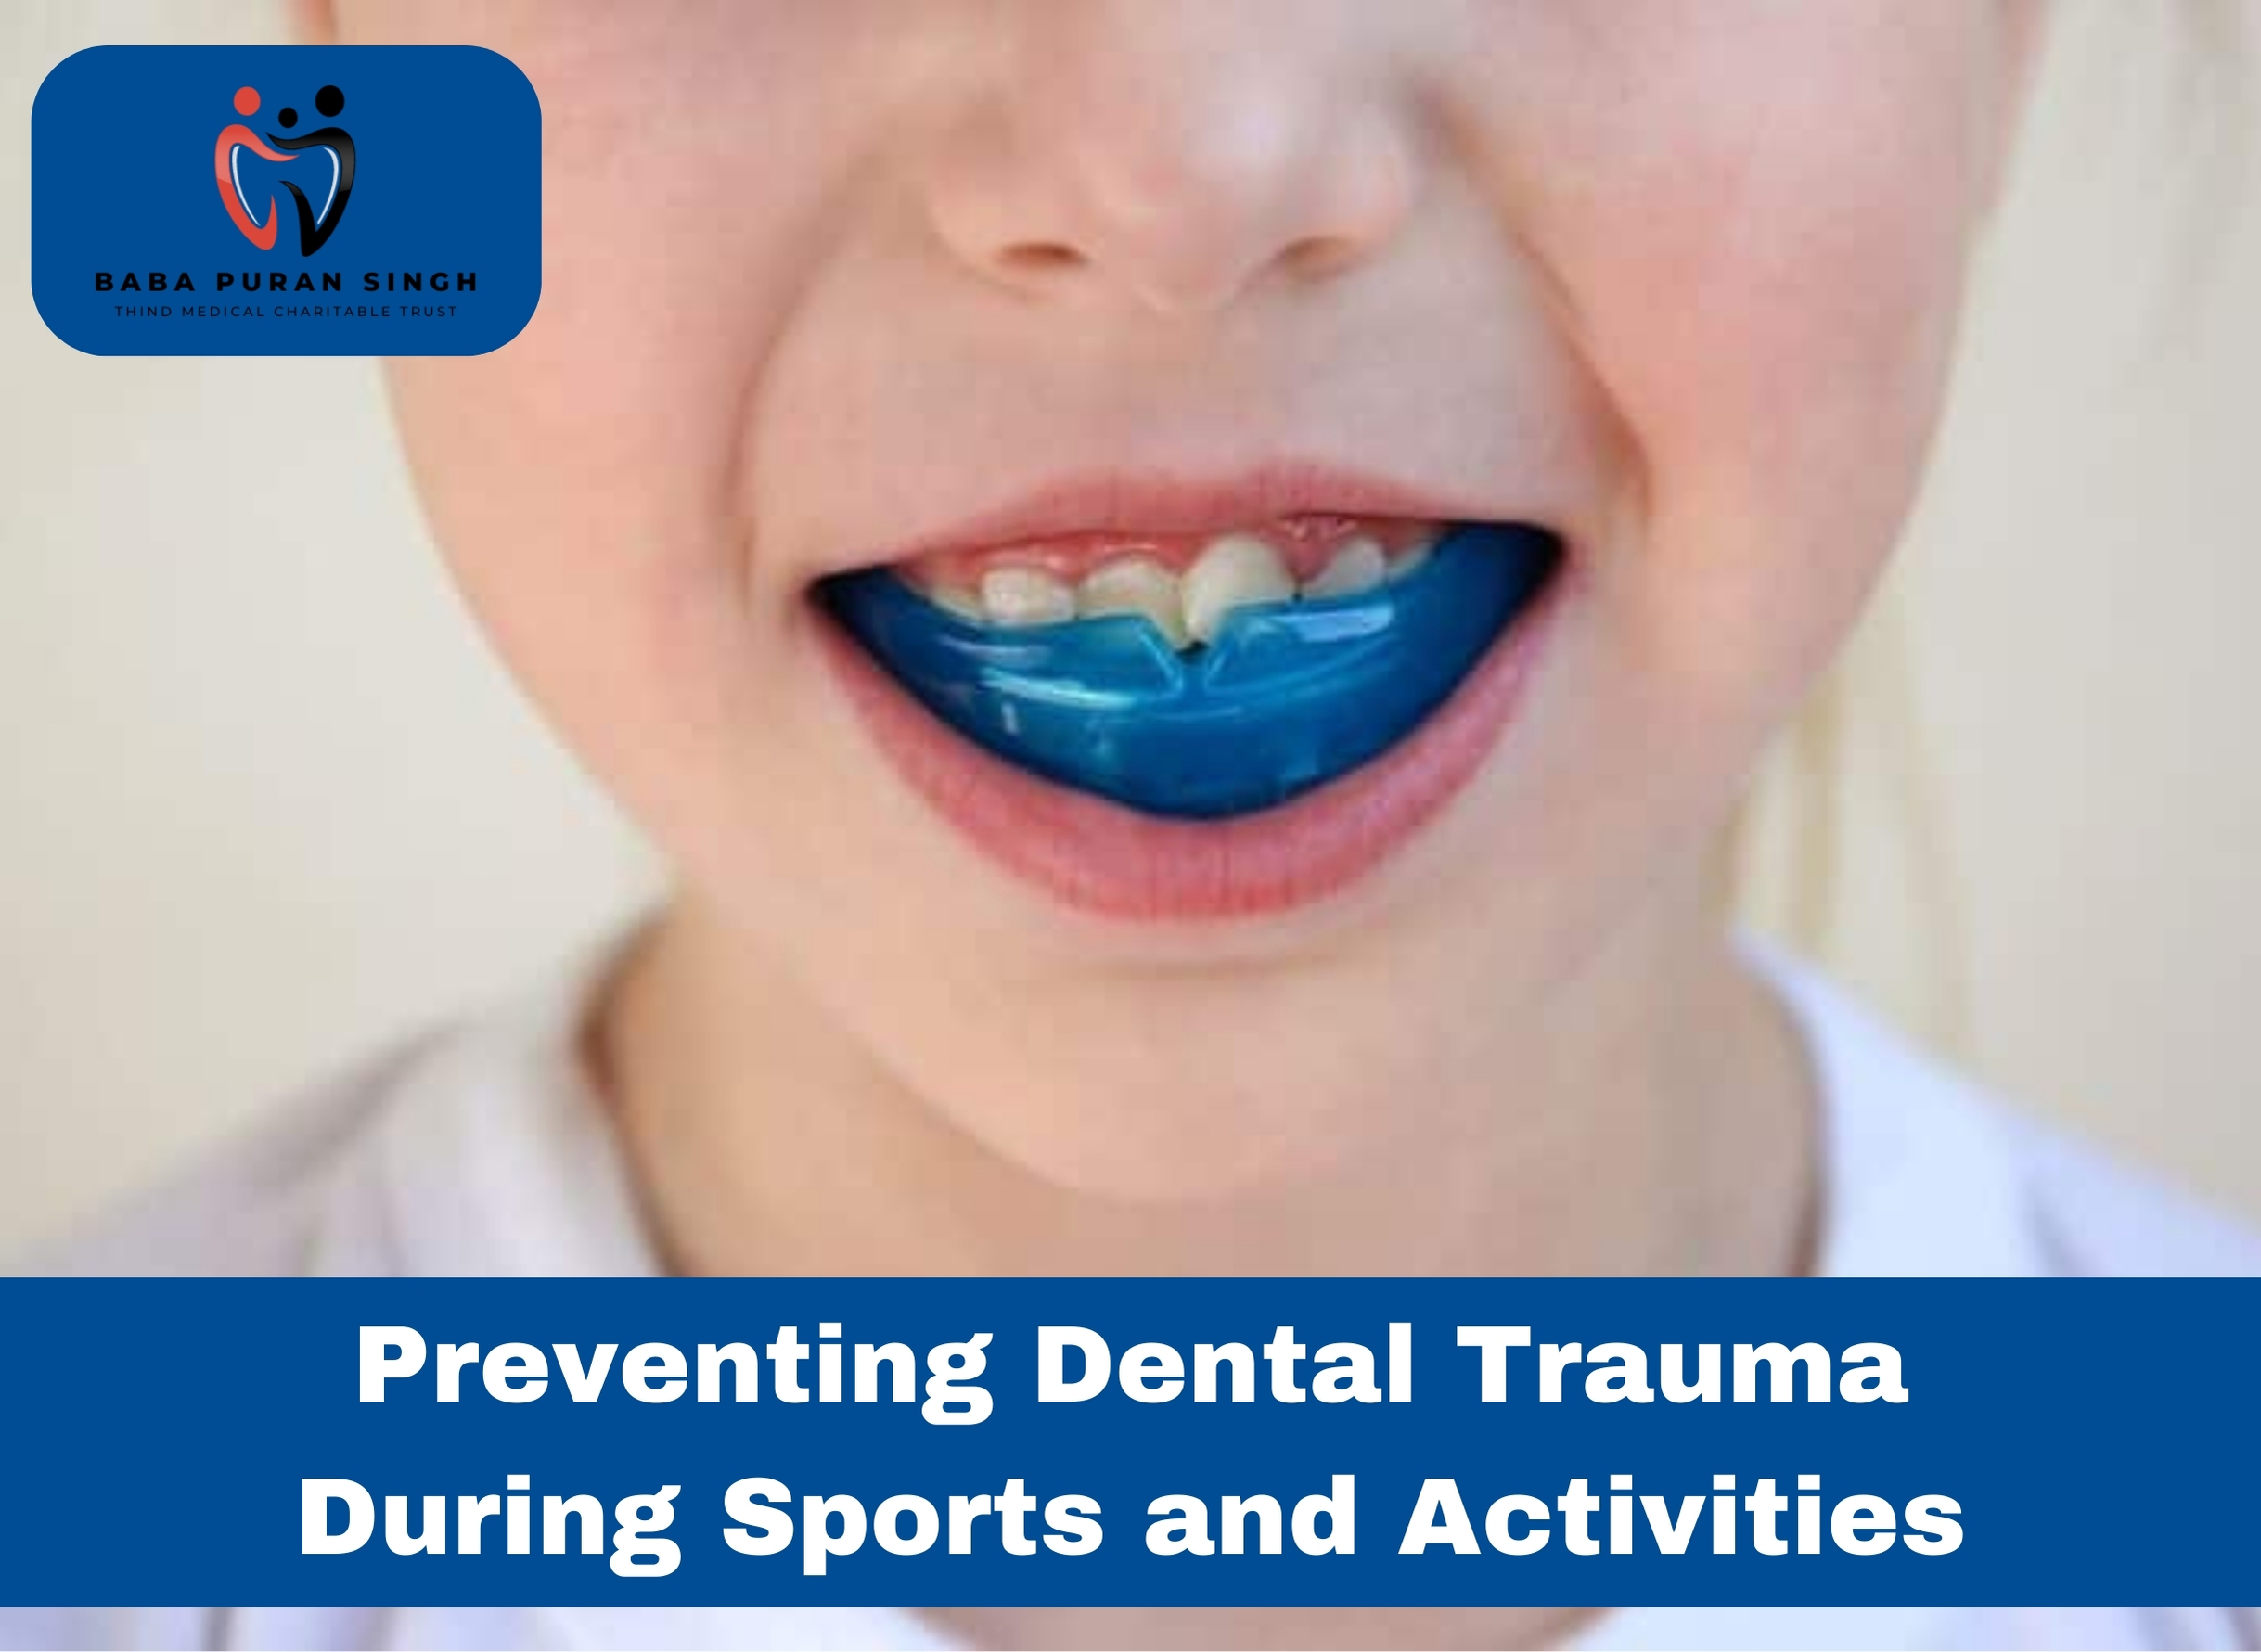 Safe Smiles: Preventing Dental Trauma During Sports and Activities